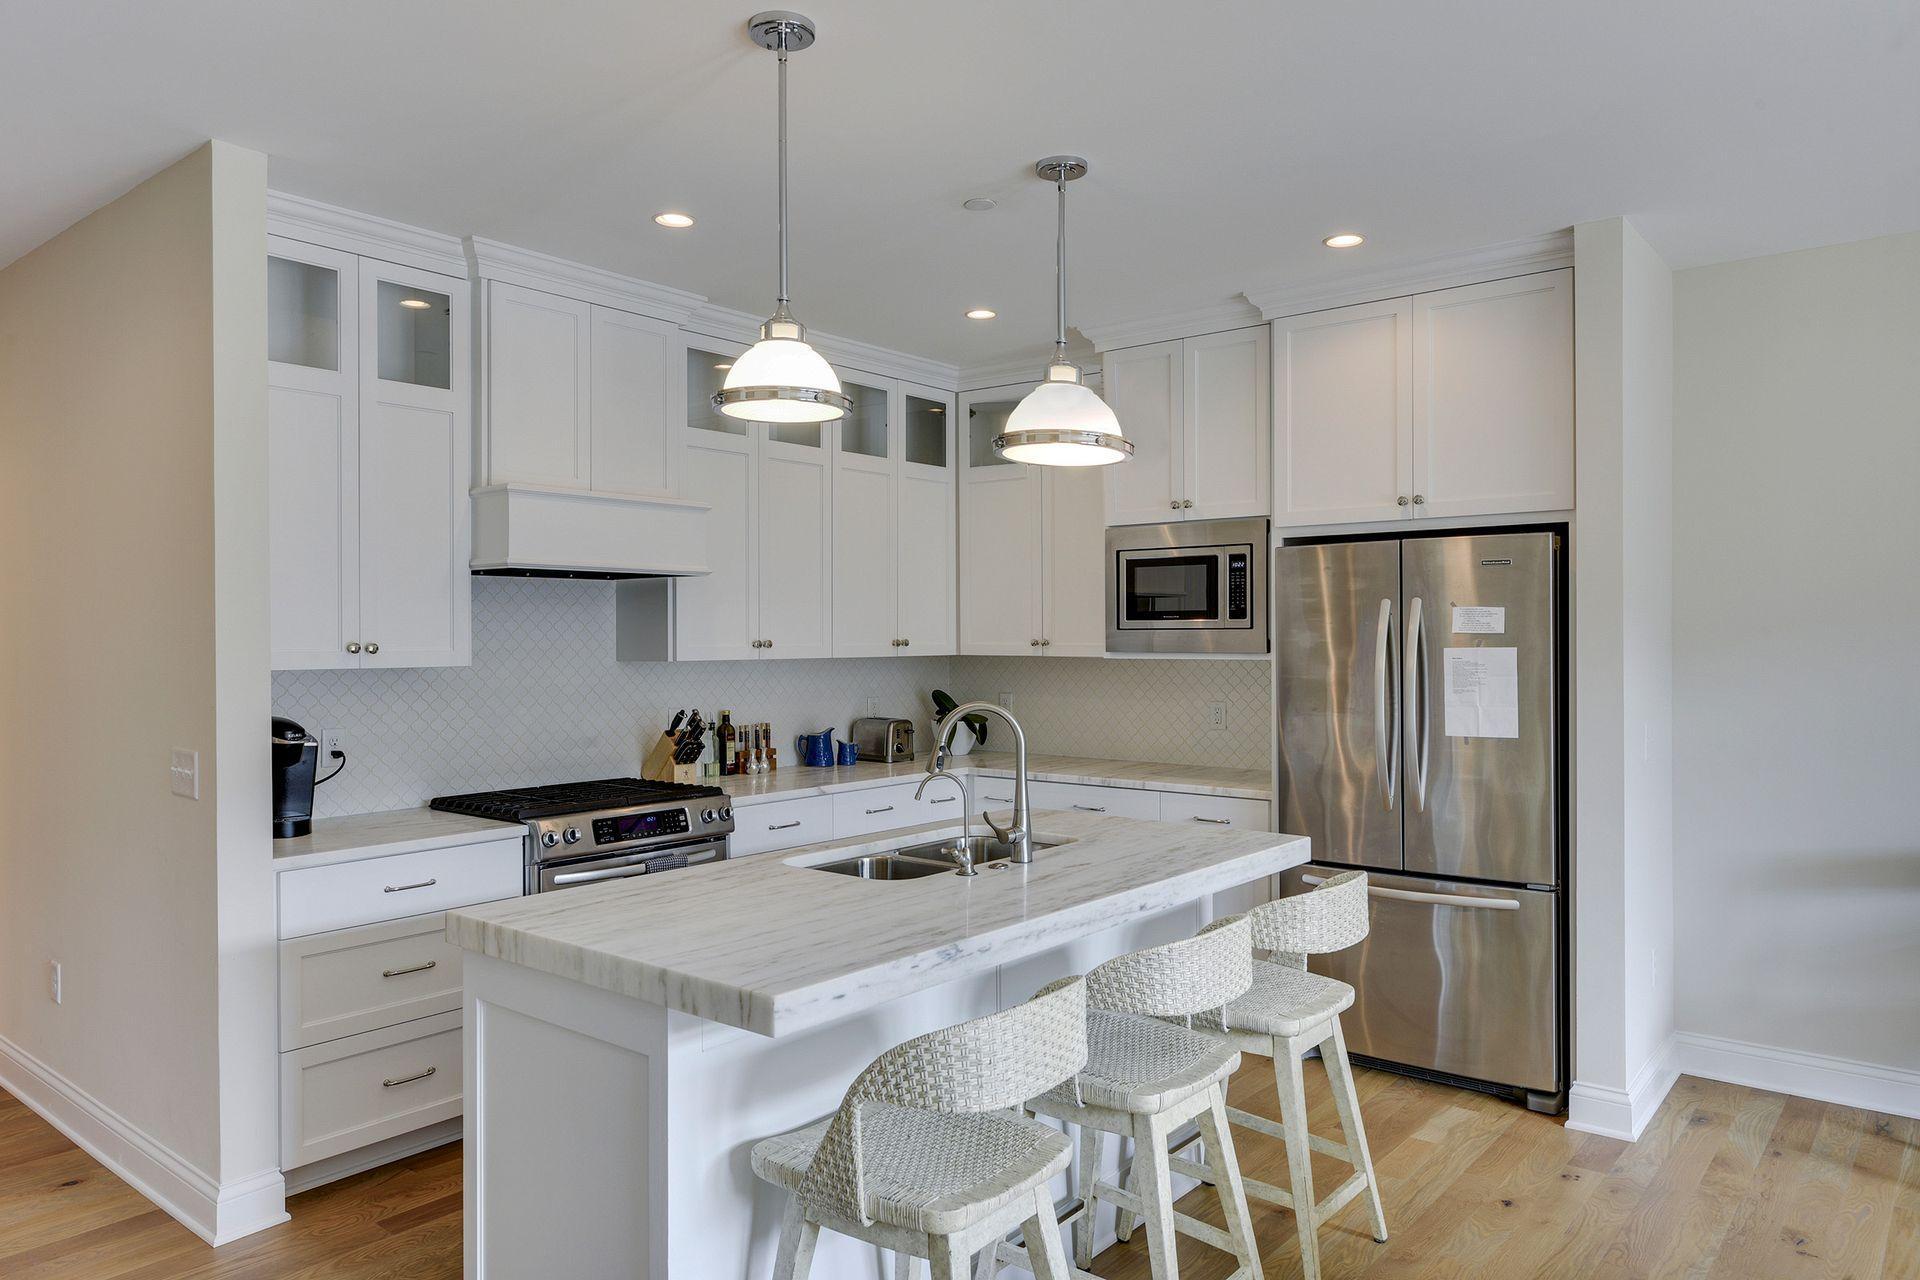 Kitchen features SS appliances, gas range, crisp white tiles and cabinetry